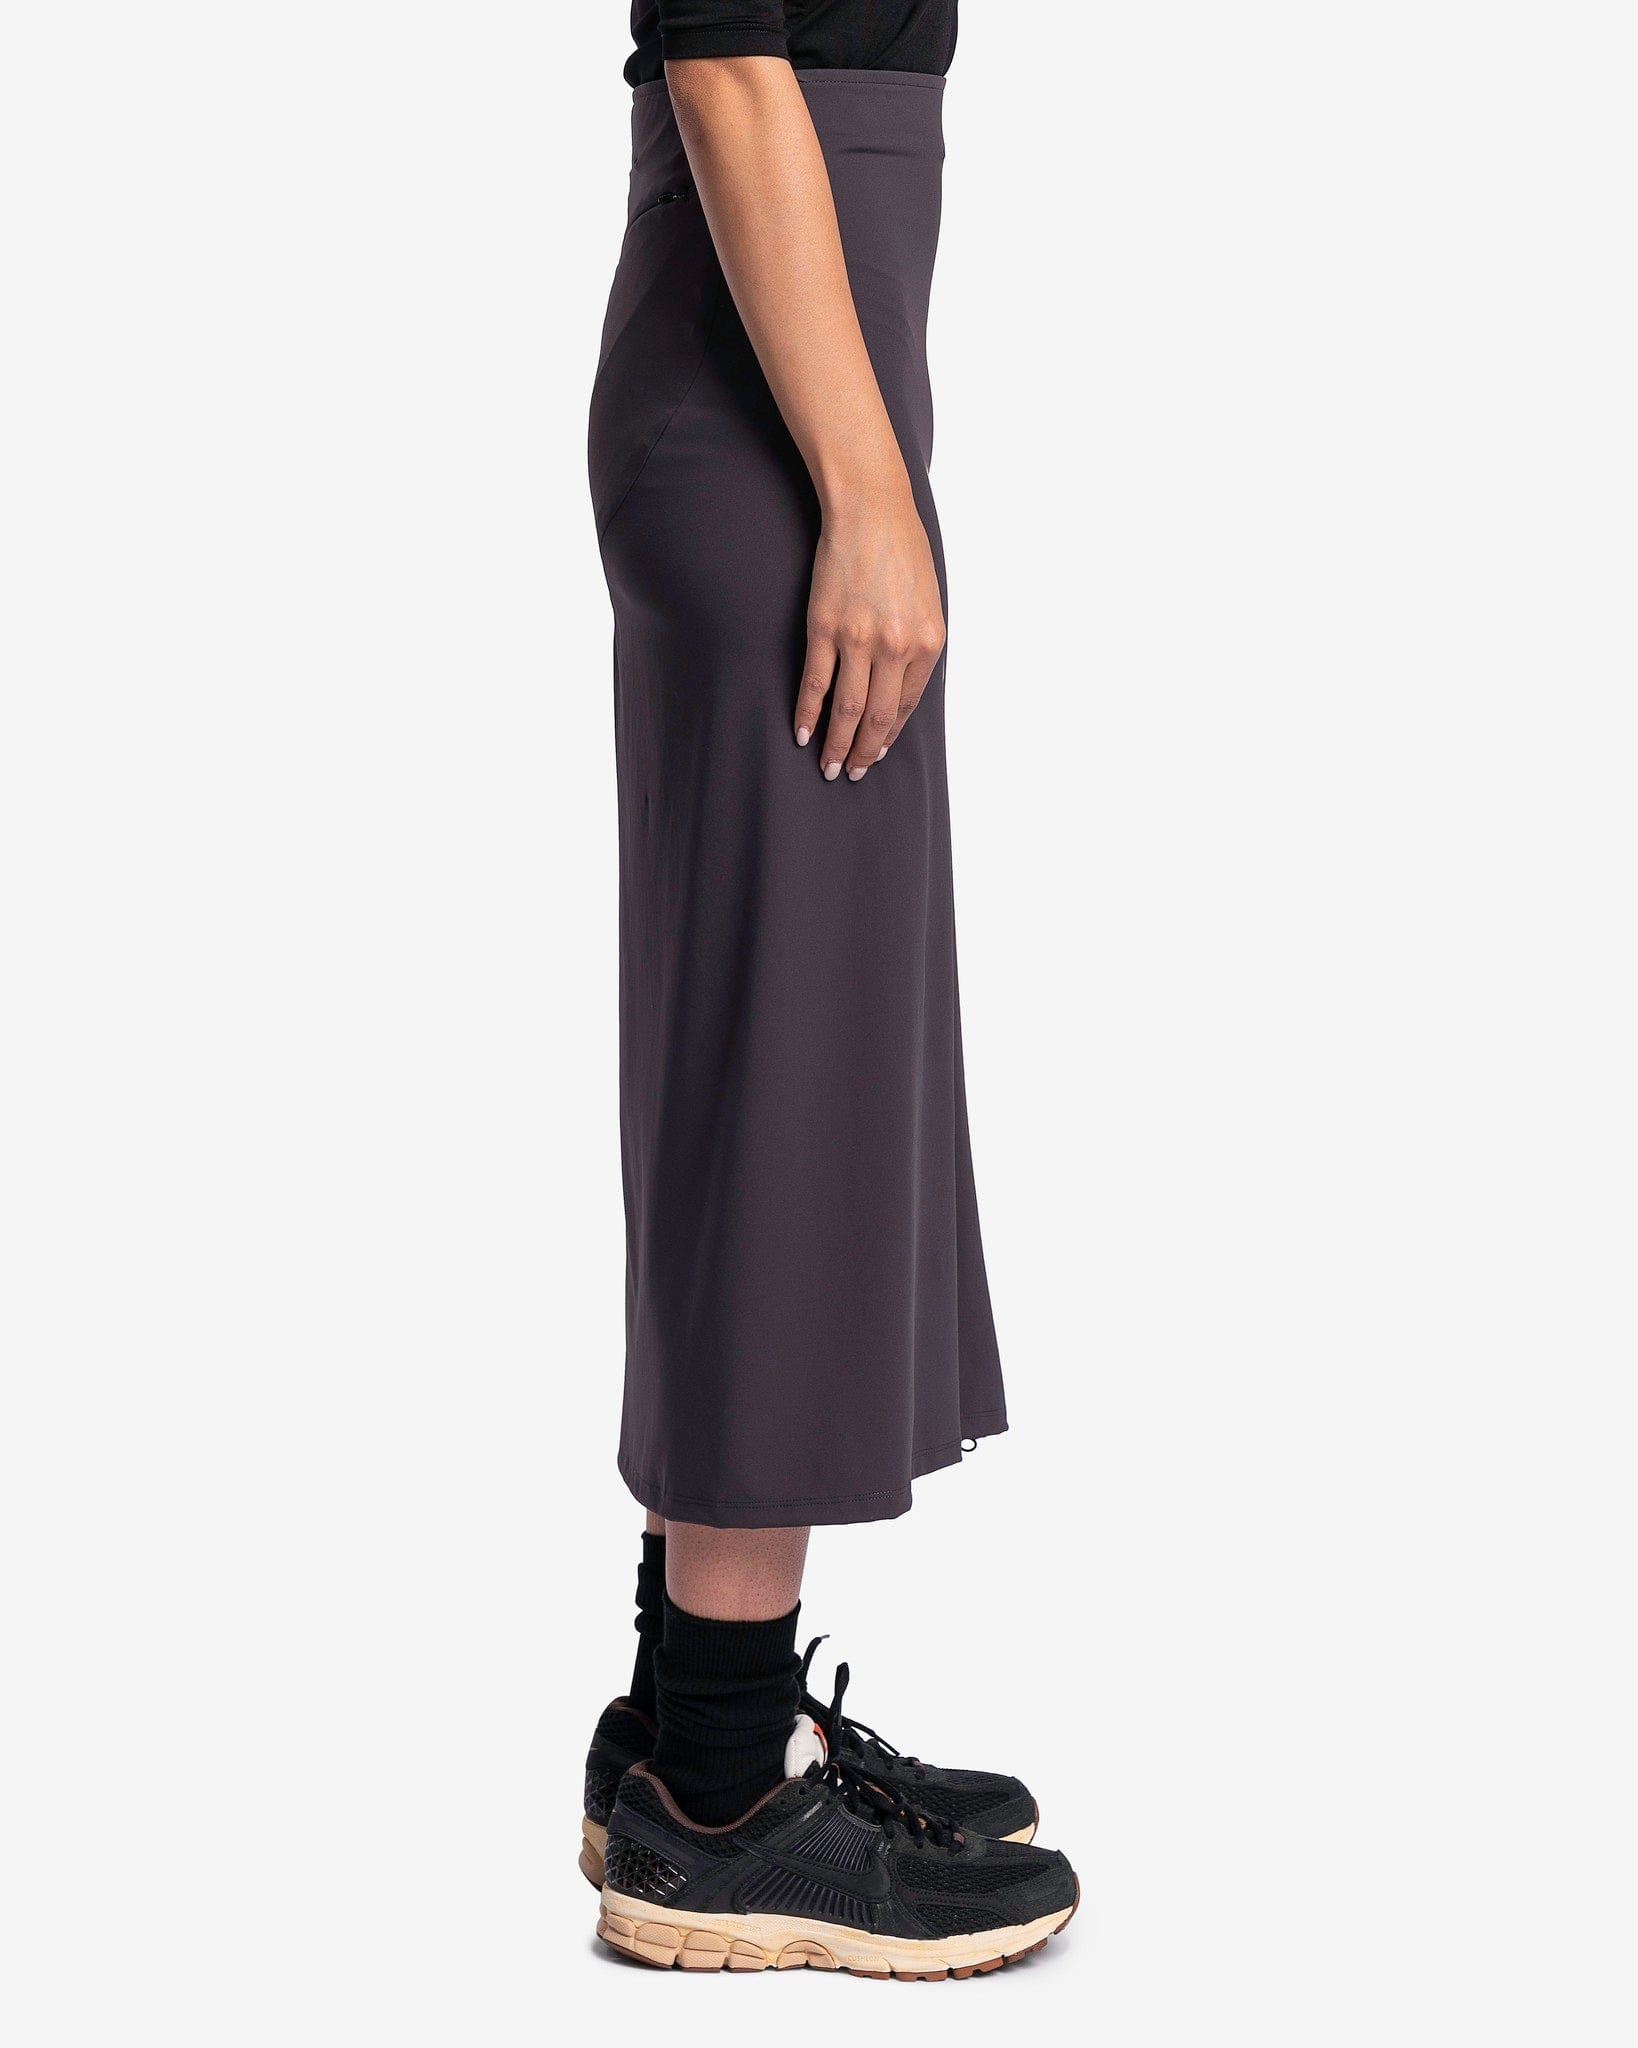 POST ARCHIVE FACTION (P.A.F) Women Skirts 5.0+ Skirt Center in Charcoal